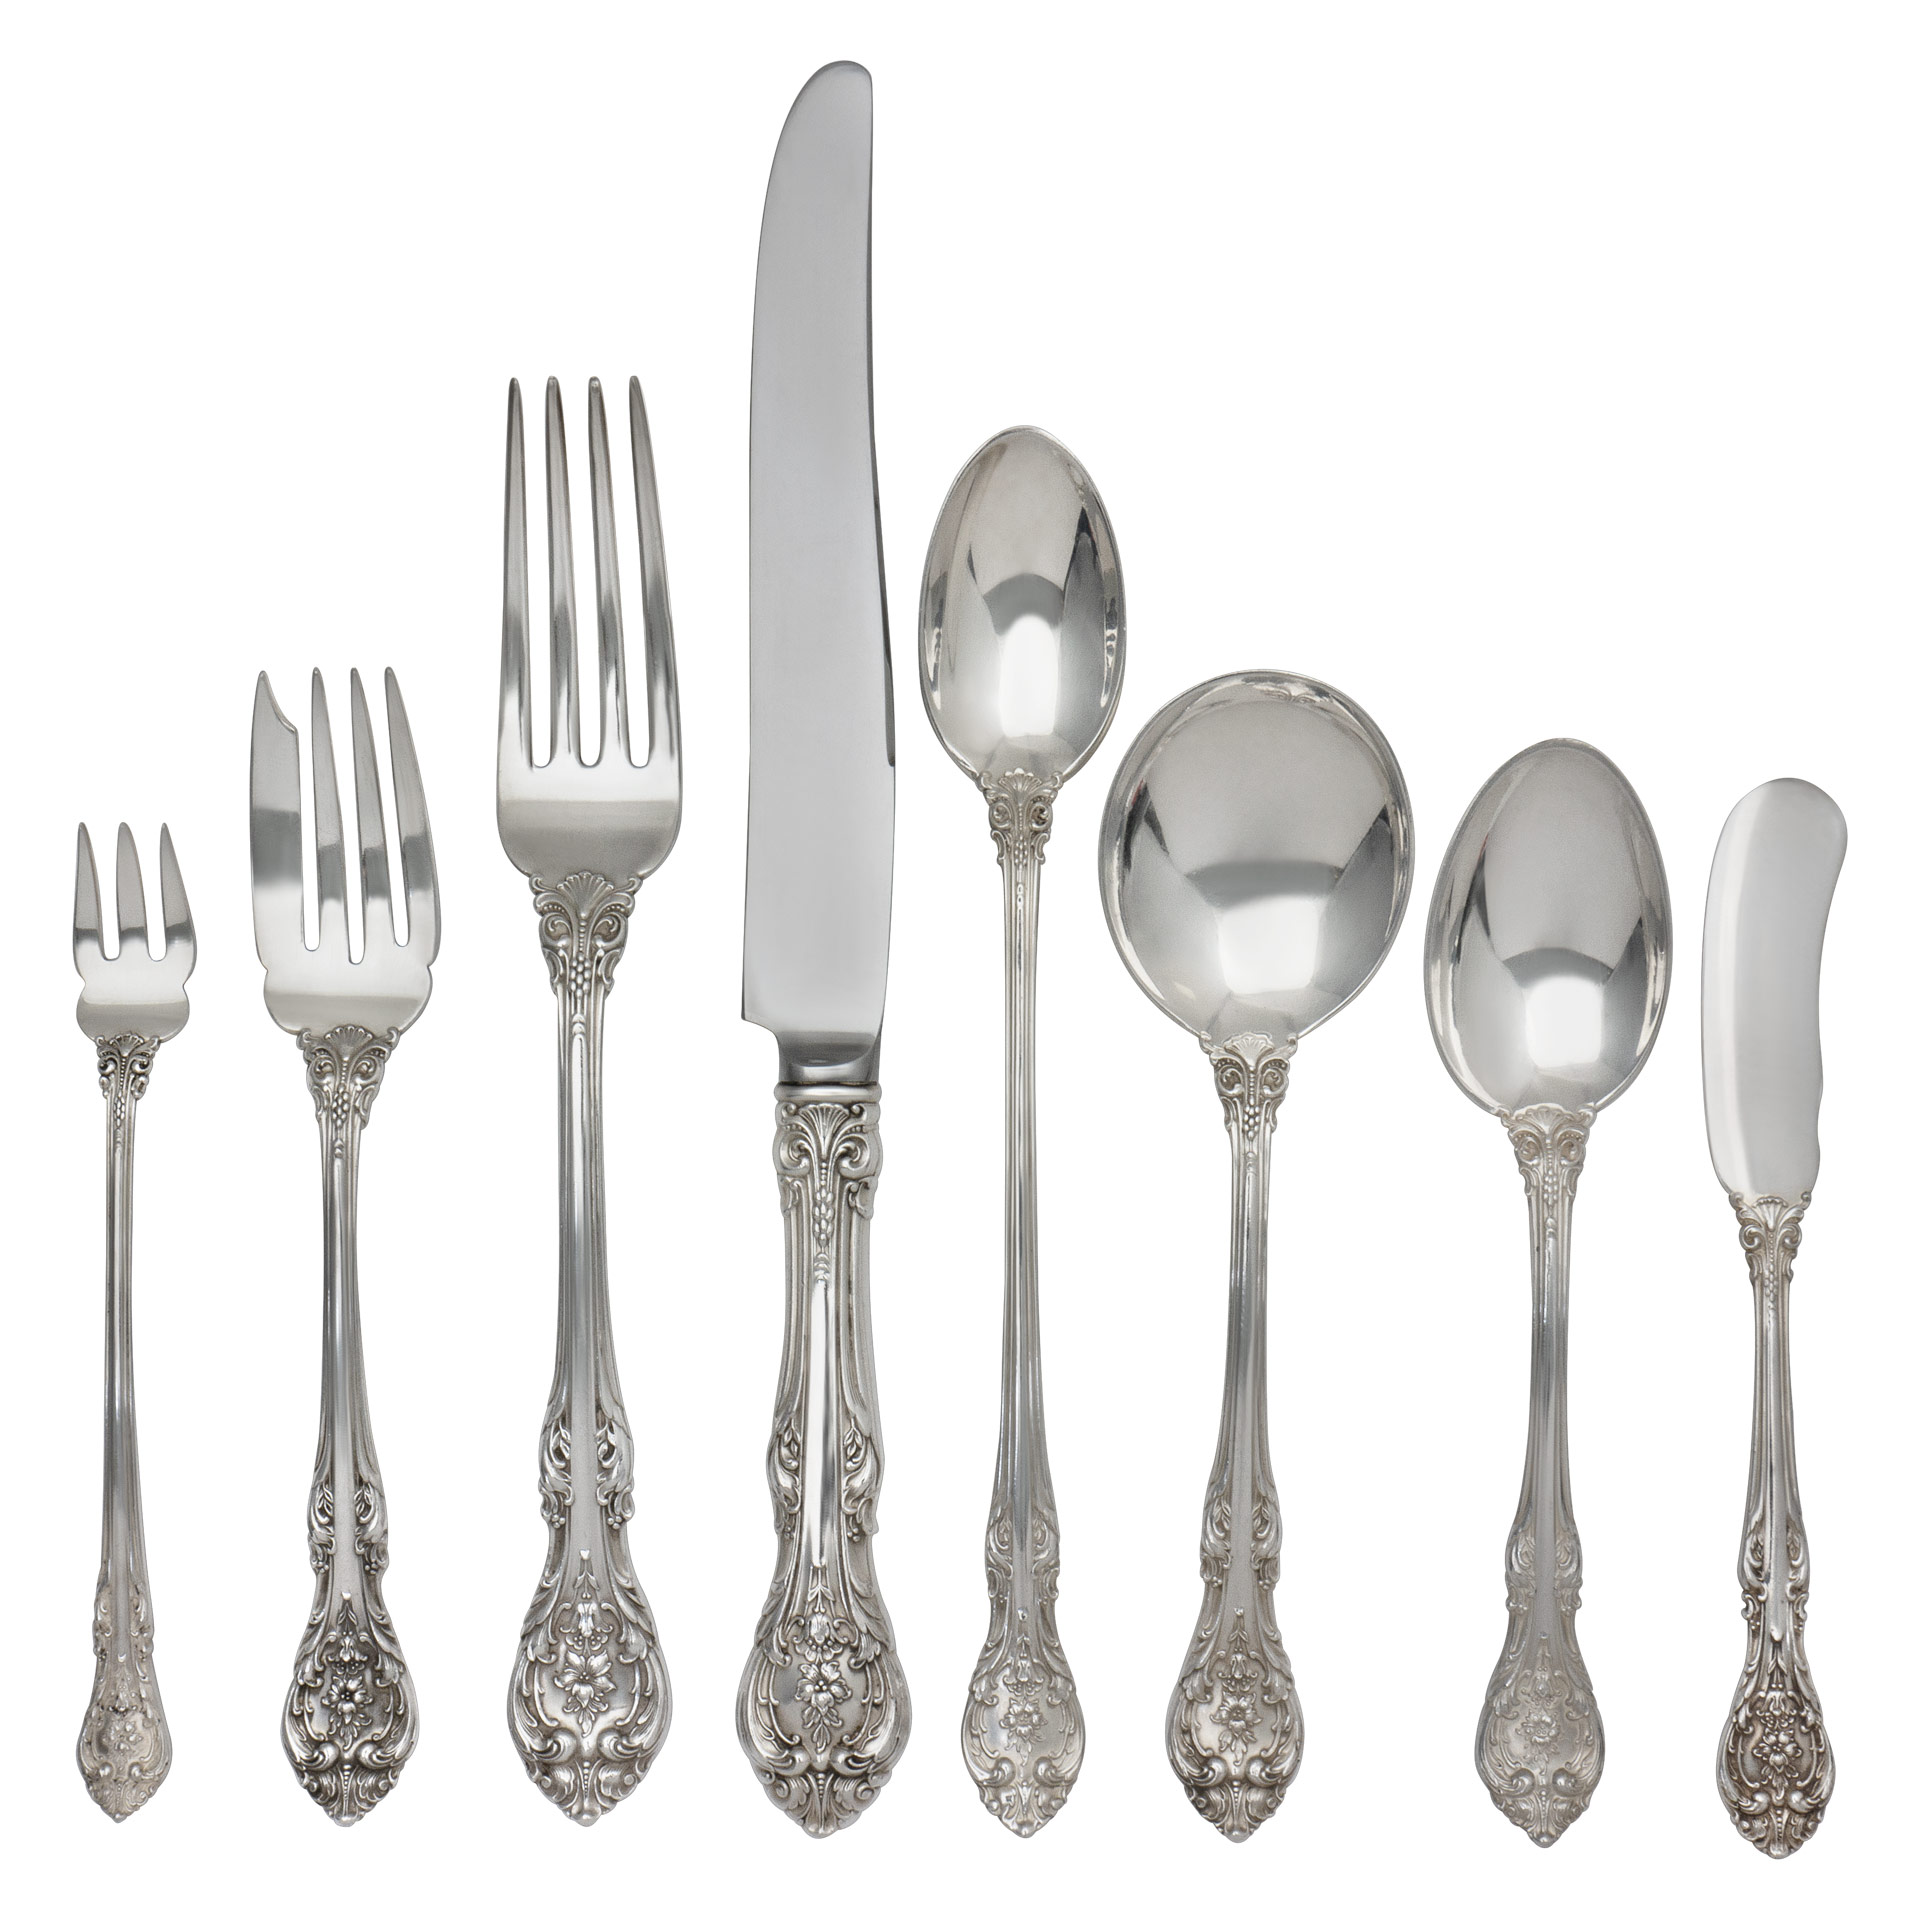 KING EDWARD Sterling Silver Flatware set patented in 1936 by Gorham- 121 pieces total. 8 Place setting for 10 + 5 Serving Pieces image 1